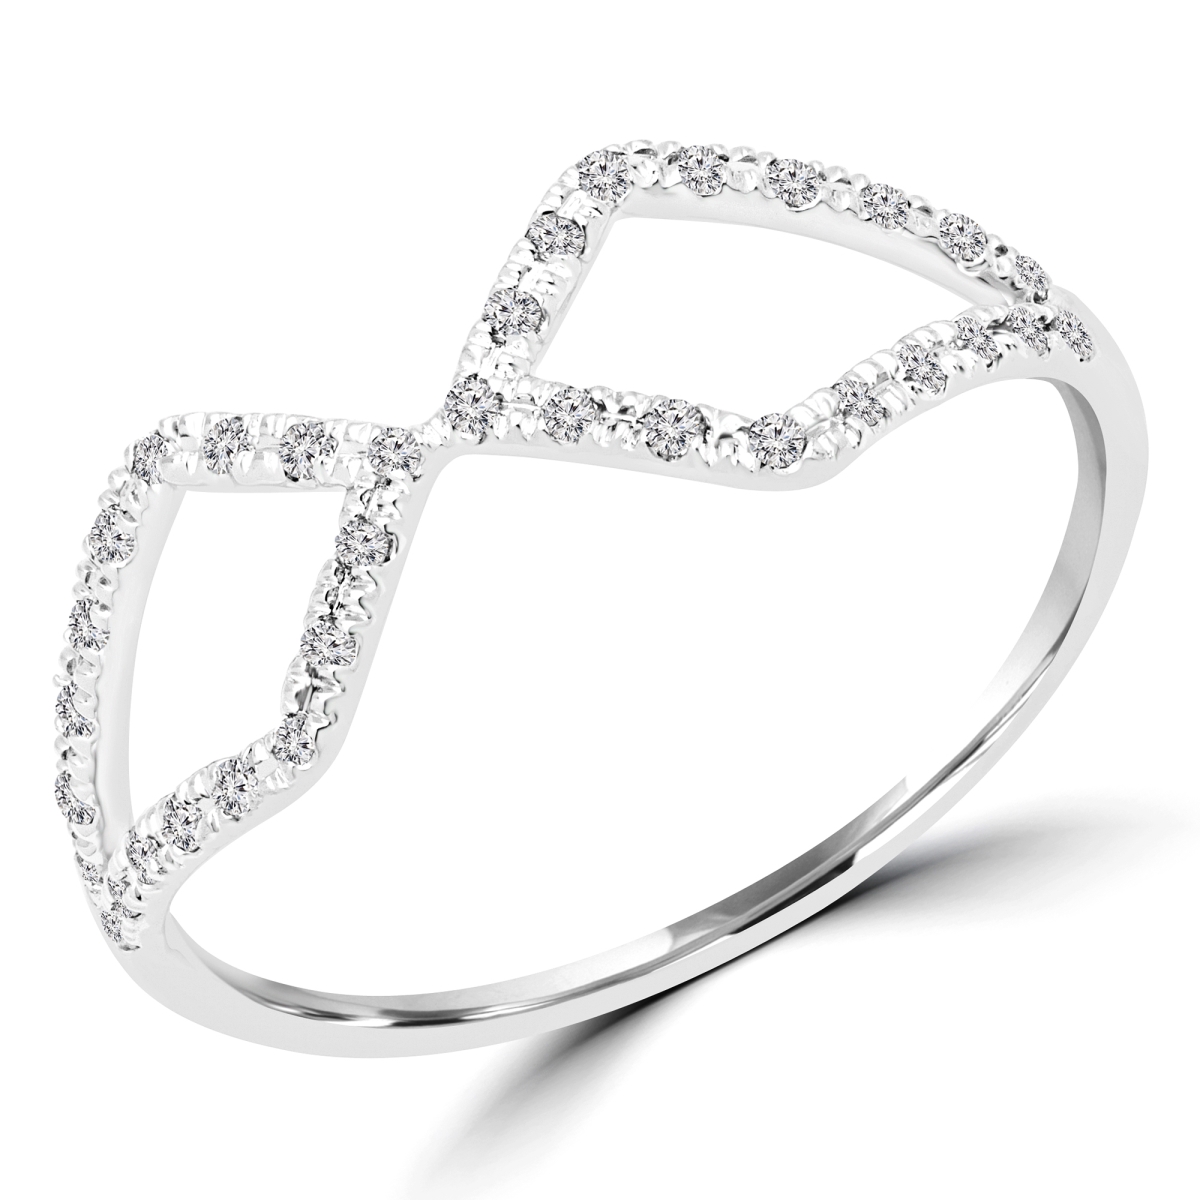 Picture of Majesty Diamonds MDR170055-P 0.13 CTW Round Diamond Cocktail Ring in 14K White Gold